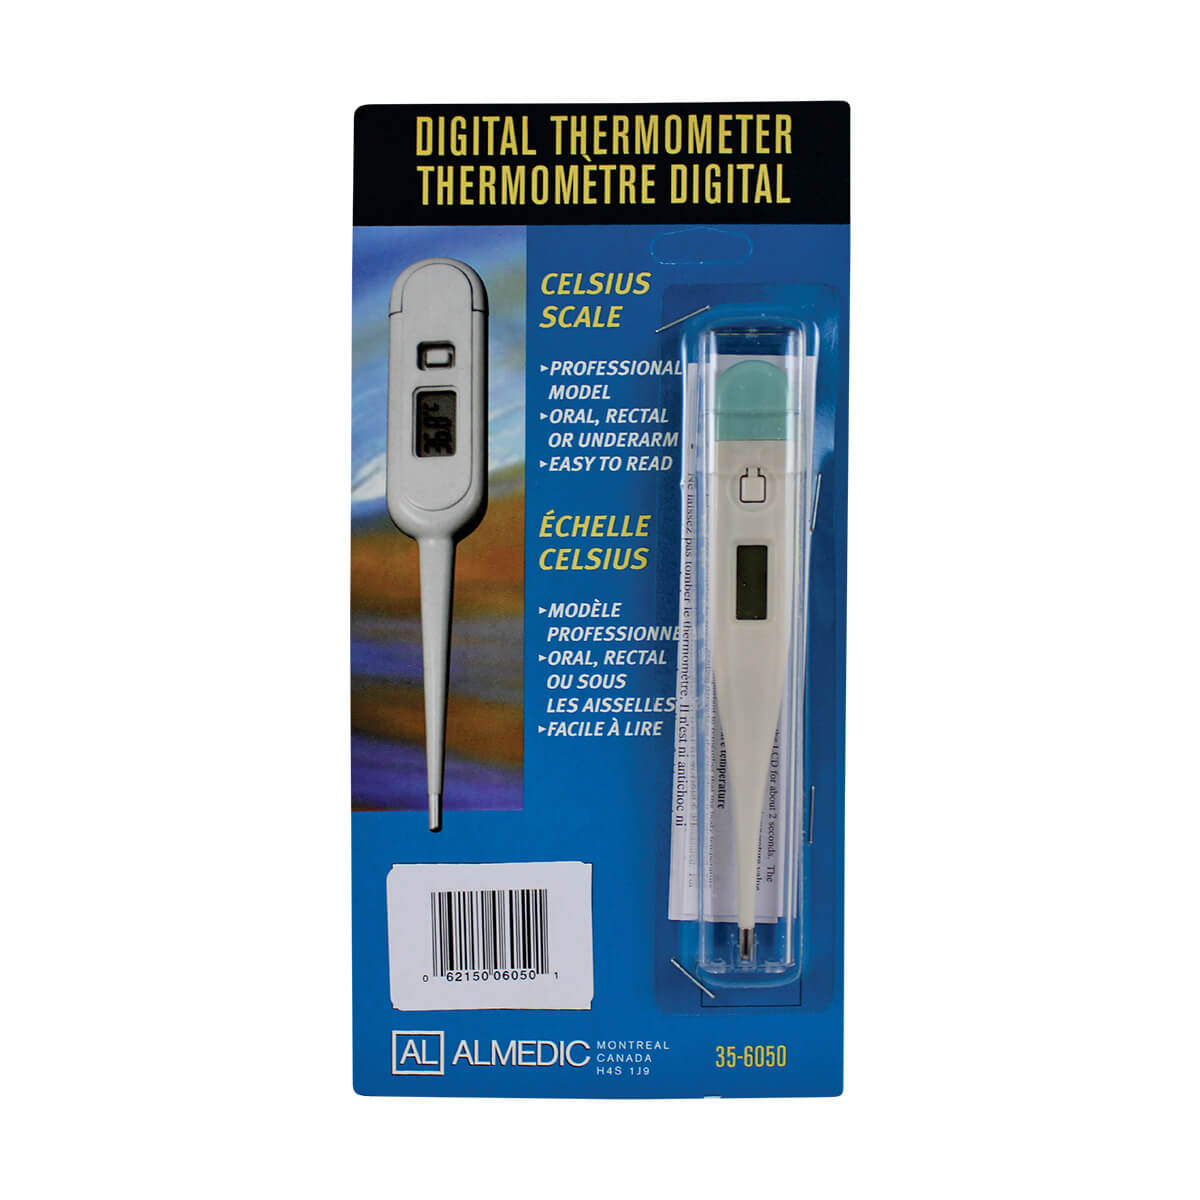 Digital Thermometer - Celsius